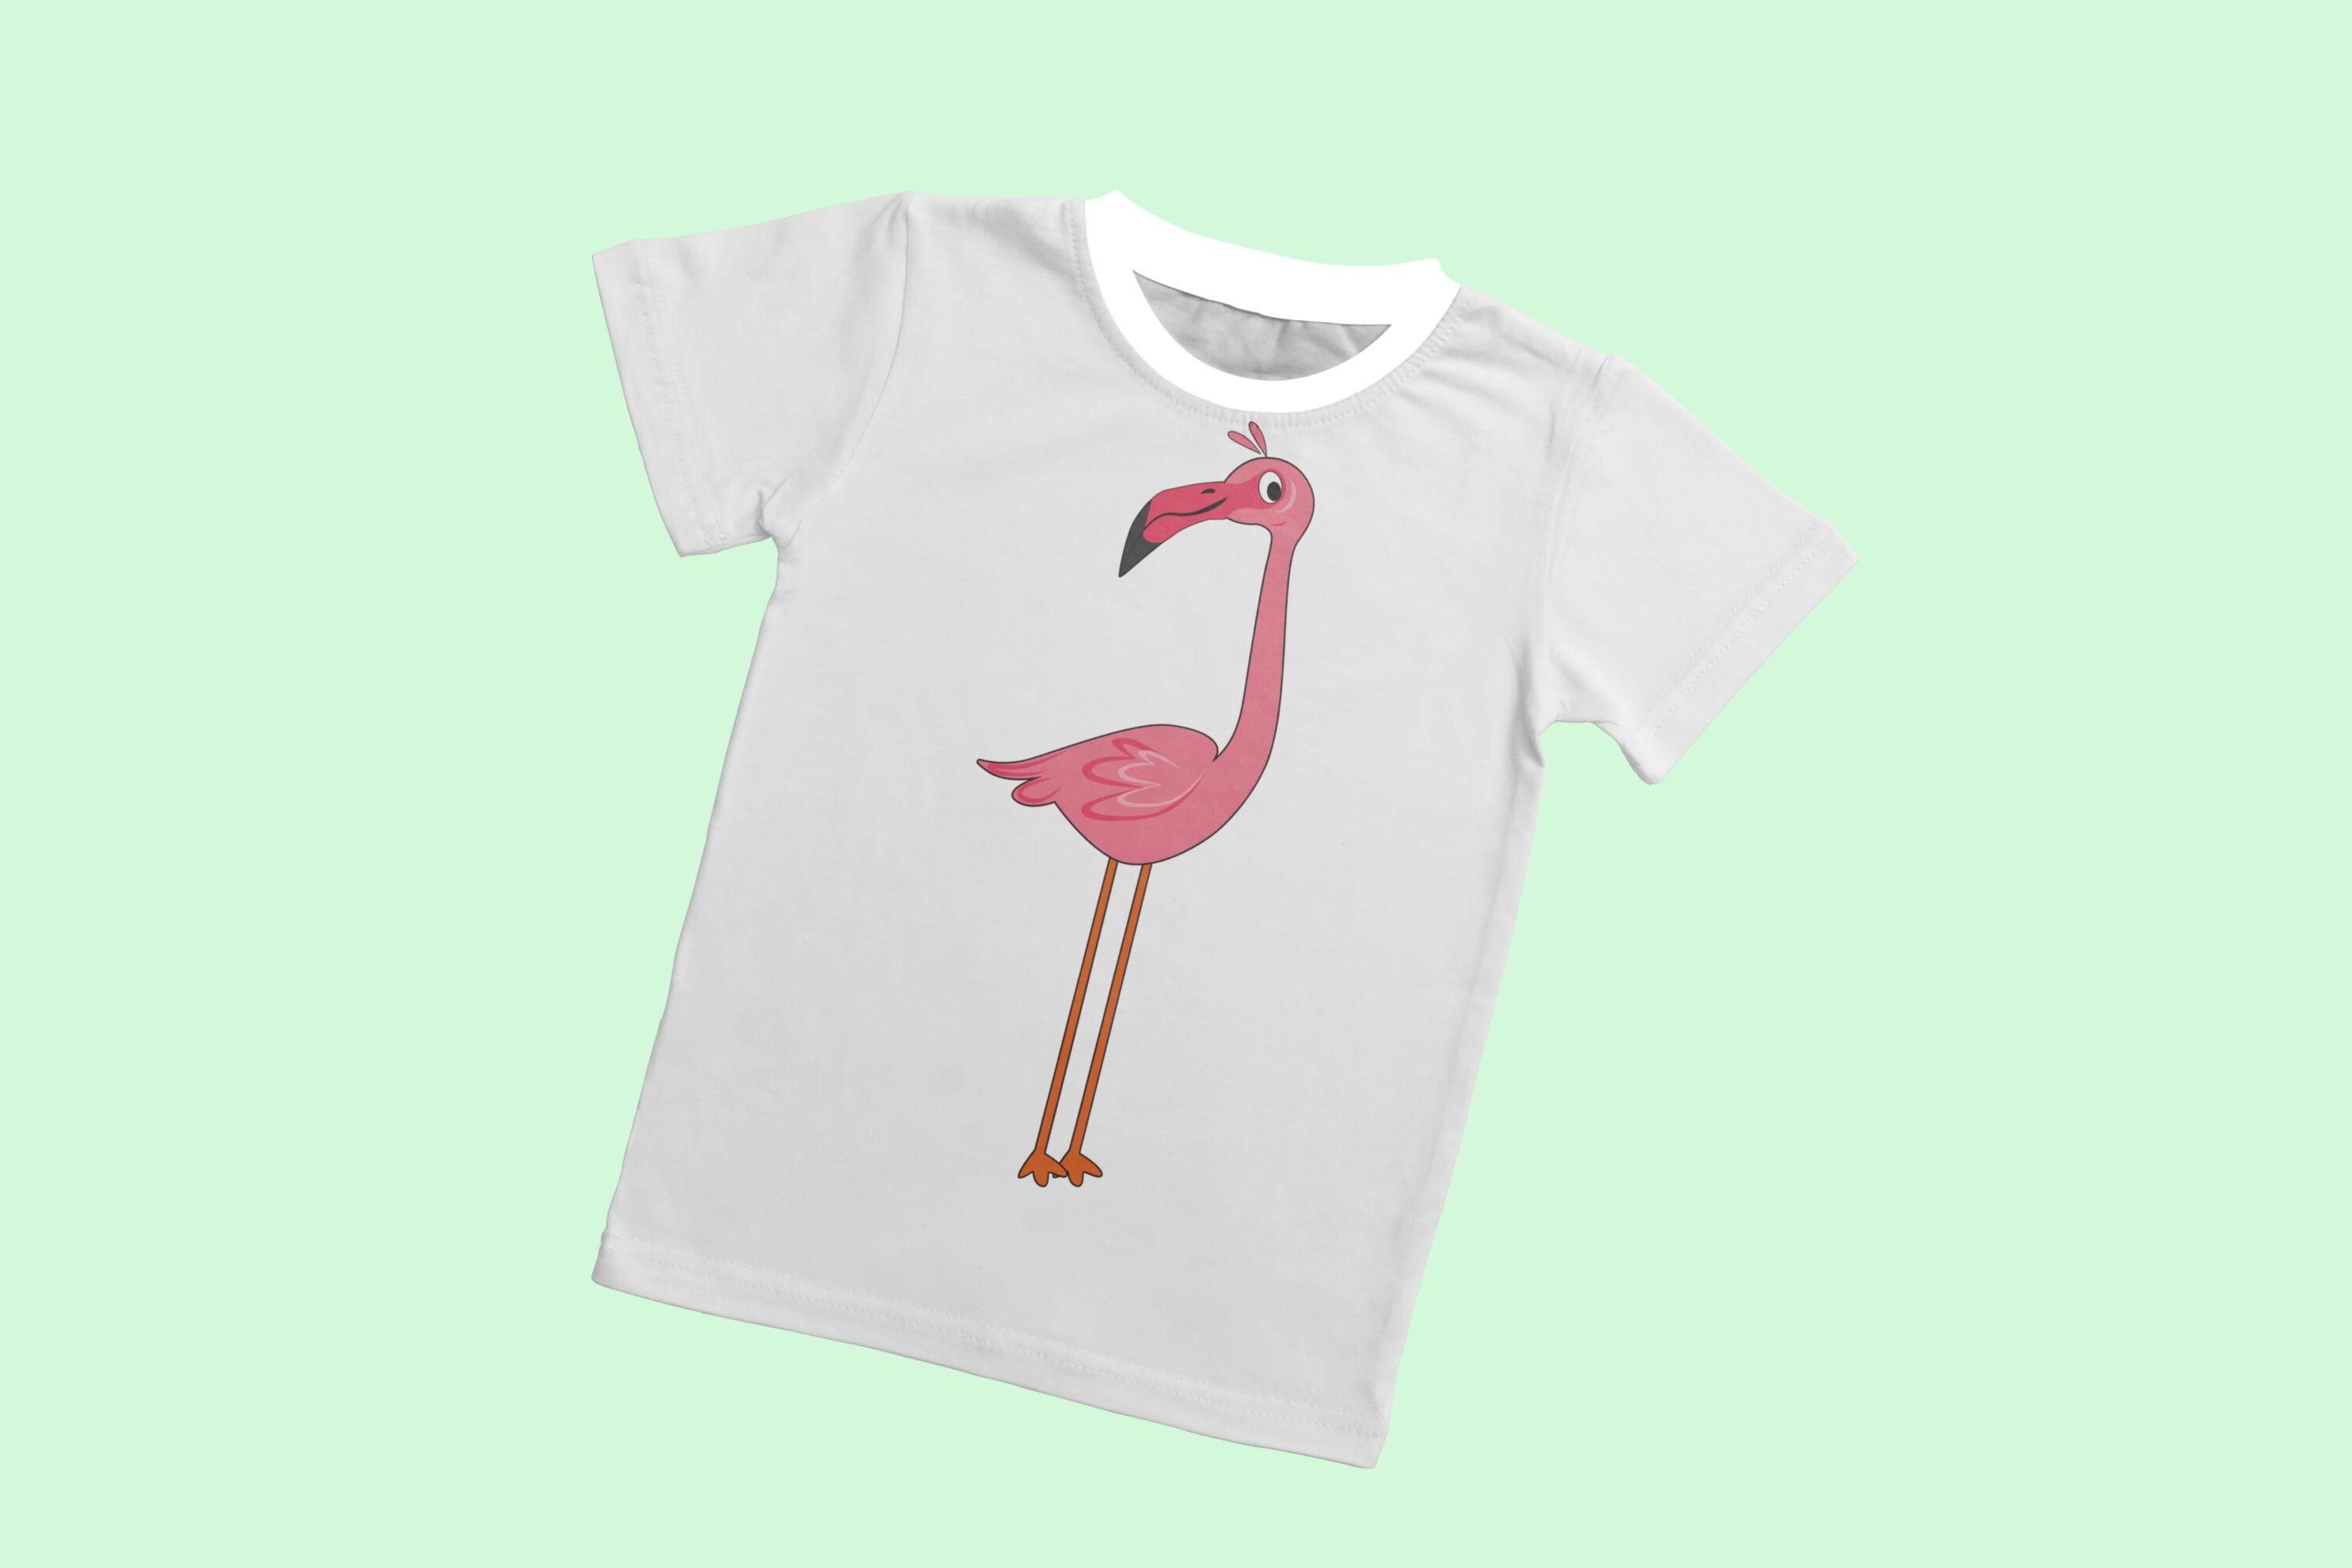 Interested pink flamingo for the white t-shirt.